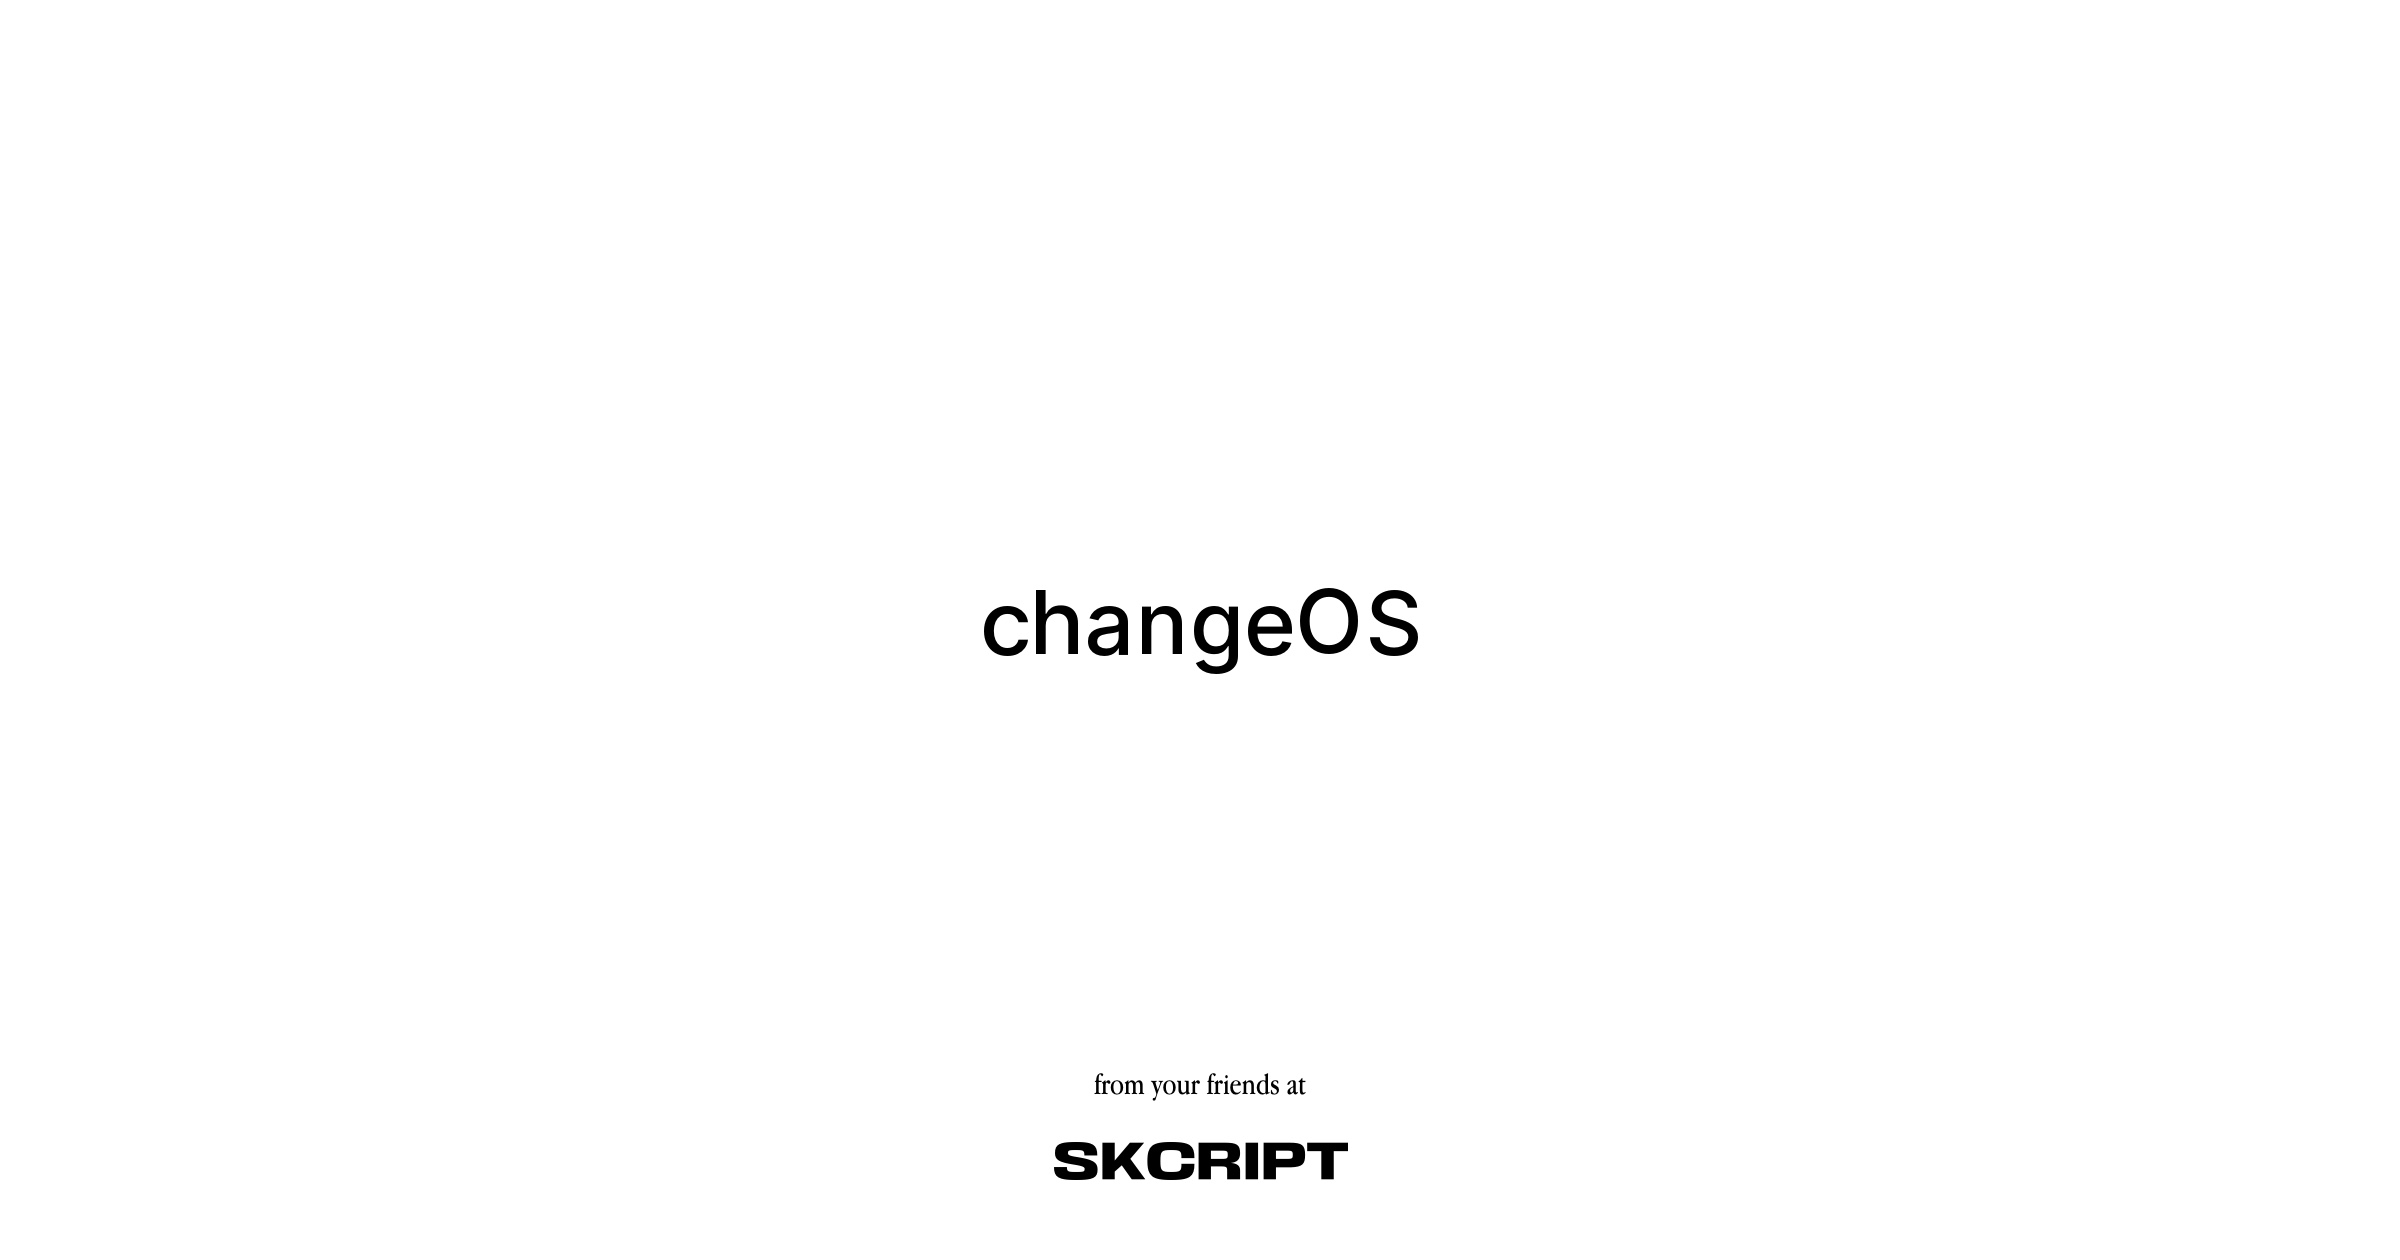 Introducing changeOS